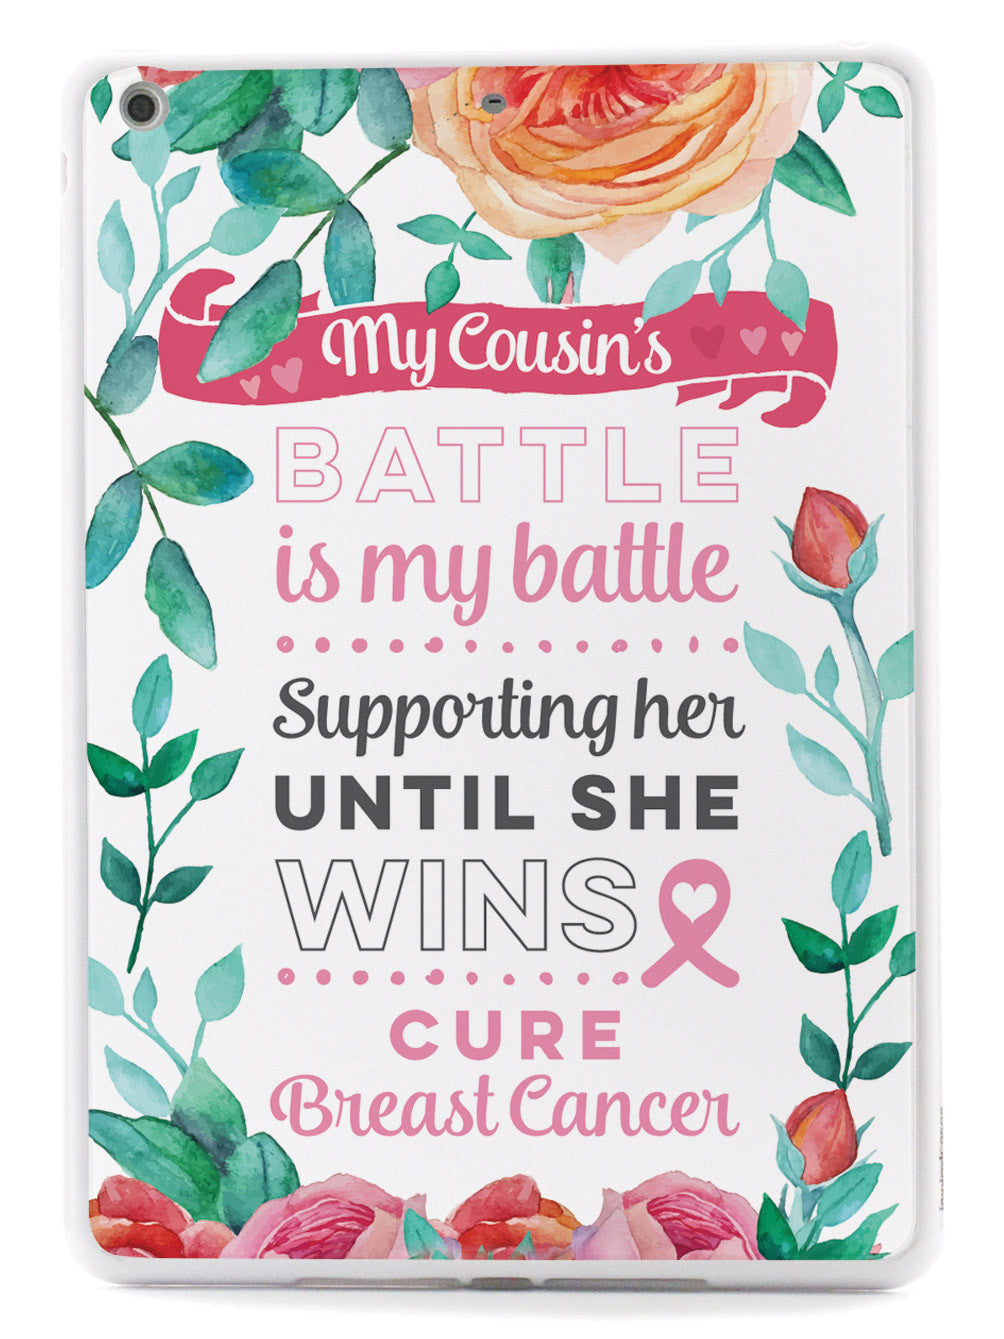 My Cousin's Battle (Female) - Breast Cancer Awareness Case